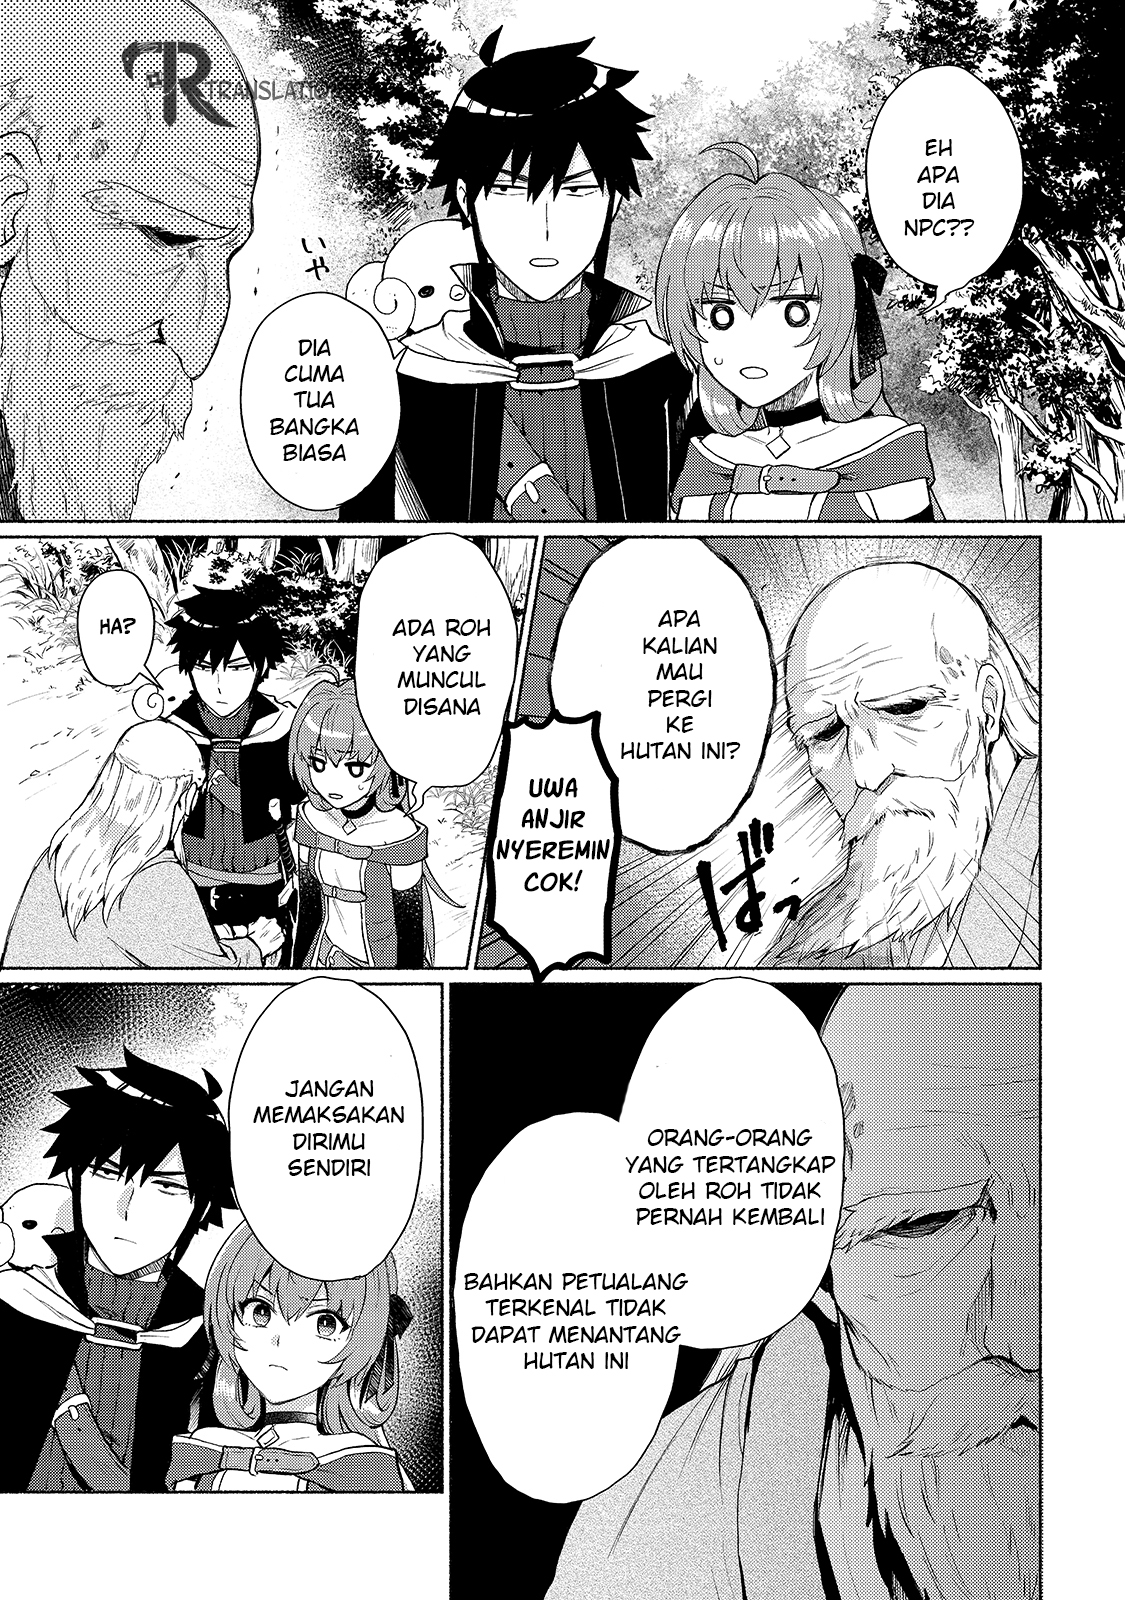 Dilarang COPAS - situs resmi www.mangacanblog.com - Komik when i was reincarnated in another world i was a heroine and he was a hero 005 - chapter 5 6 Indonesia when i was reincarnated in another world i was a heroine and he was a hero 005 - chapter 5 Terbaru 17|Baca Manga Komik Indonesia|Mangacan